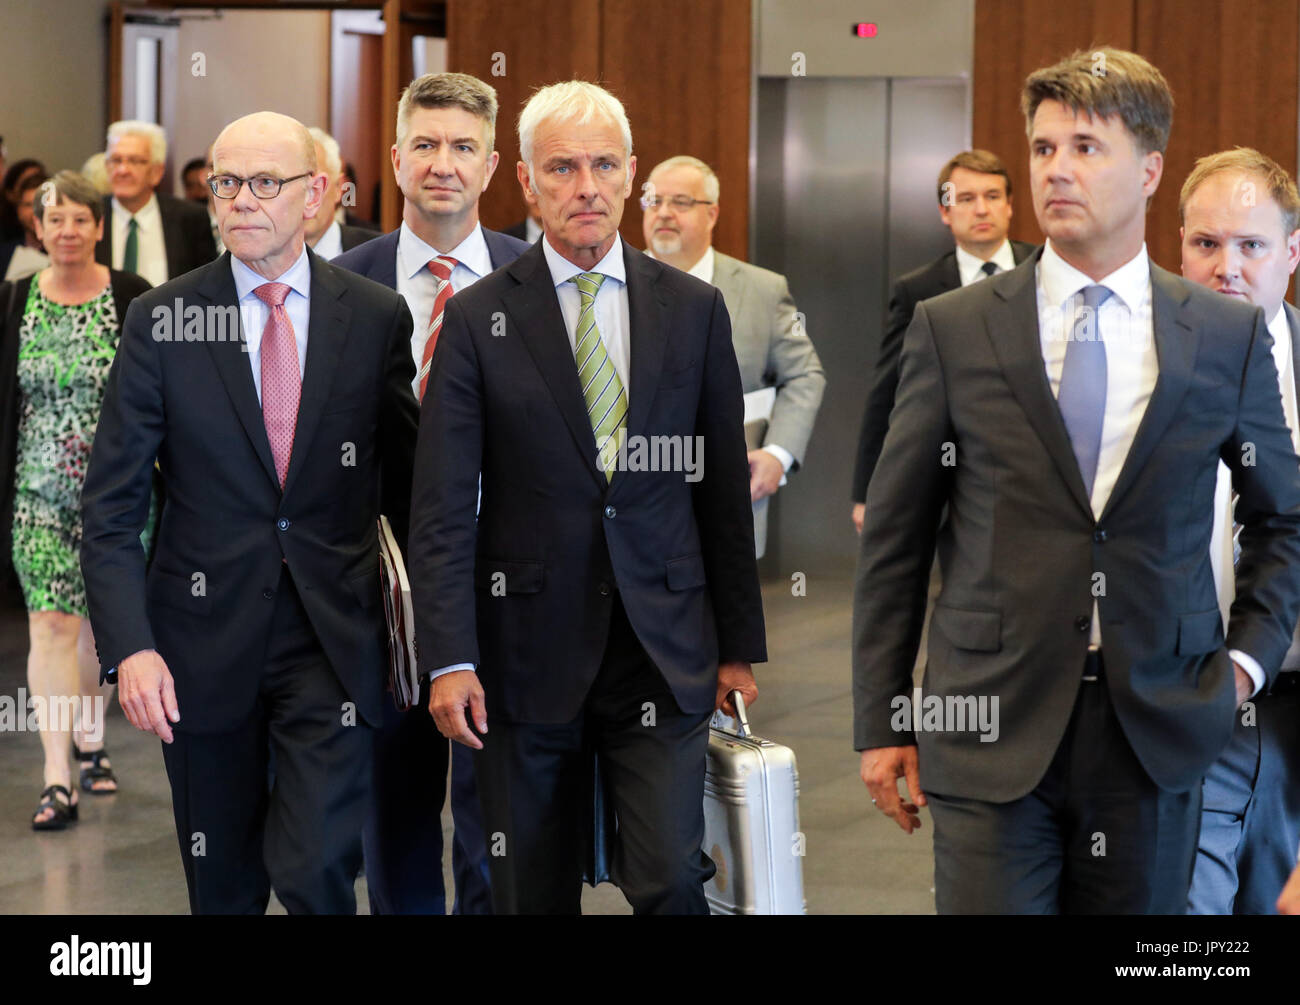 Berlin, Germany. 2nd Aug, 2017. dpatop - (L-R) Volkswagen's chief lobbyist Thomas Steg, chairman of the board of Volkswagen Matthias Mueller and chairman of the board at BMW Harald Krueger leave the Federal Ministry of the Interior after a summit on diesel and the reduction of harmful emmissions in Berlin, Germany on 2 August, 2017. The diesel summit was relocated from the Federal Ministry of Transport to the Federal Ministry of the Interior. Credit: dpa picture alliance/Alamy Live News Stock Photo